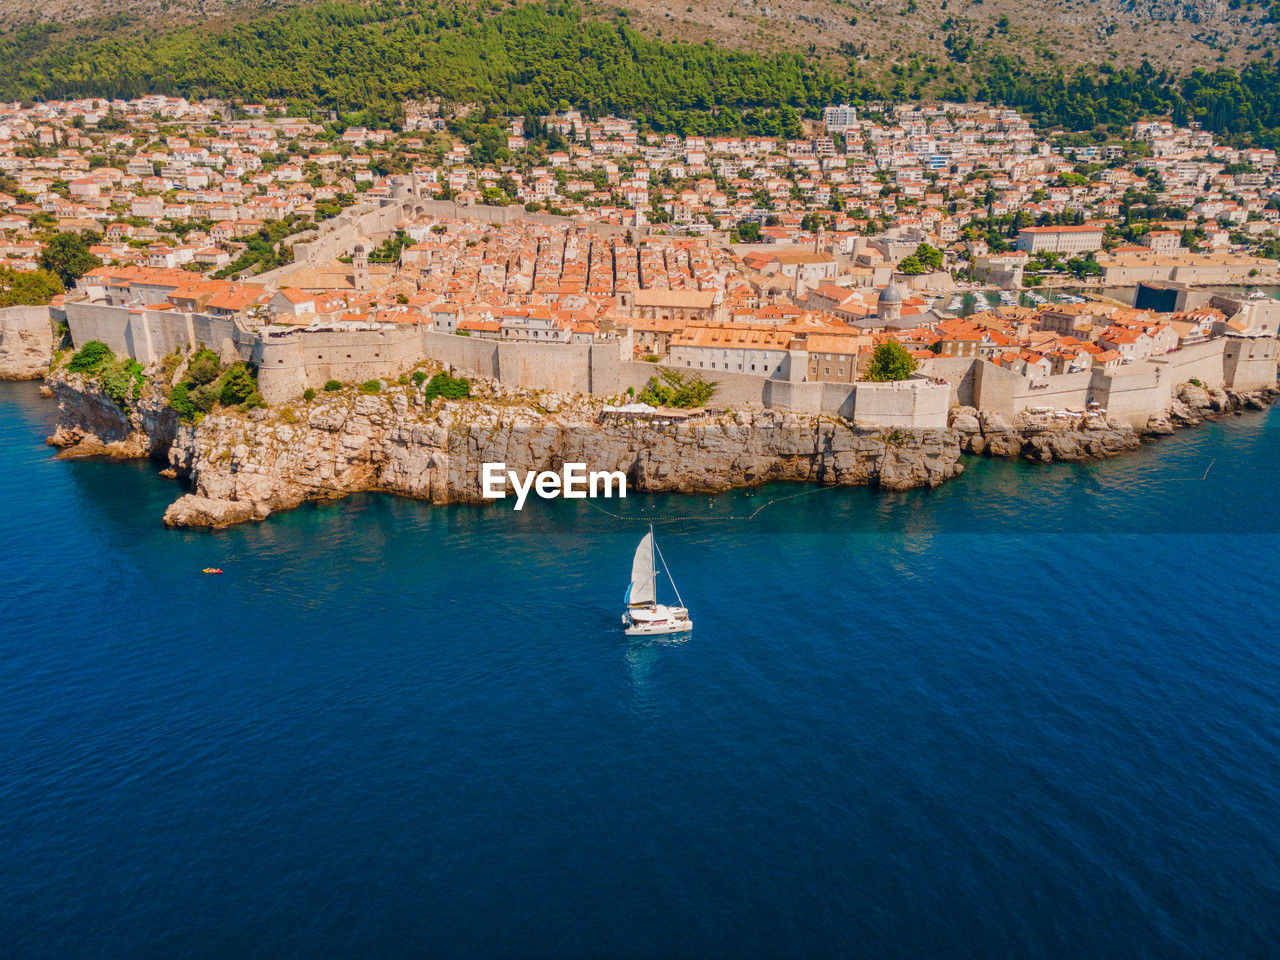 Aerial view of dubrovnik croatia old town in summer with sailing yacht catamaran passing.